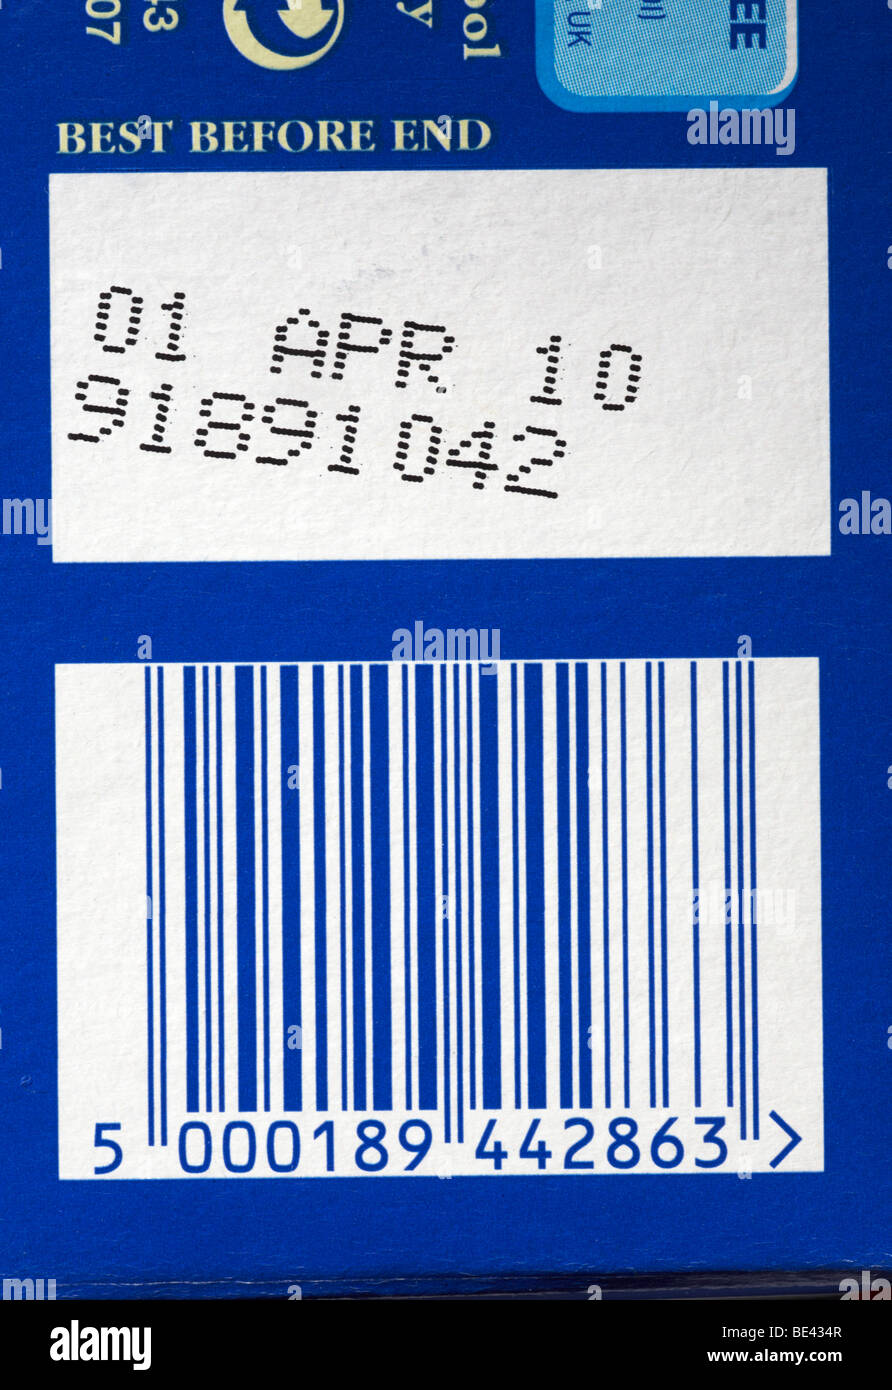 Best before end date on wrapper box Stock Photo